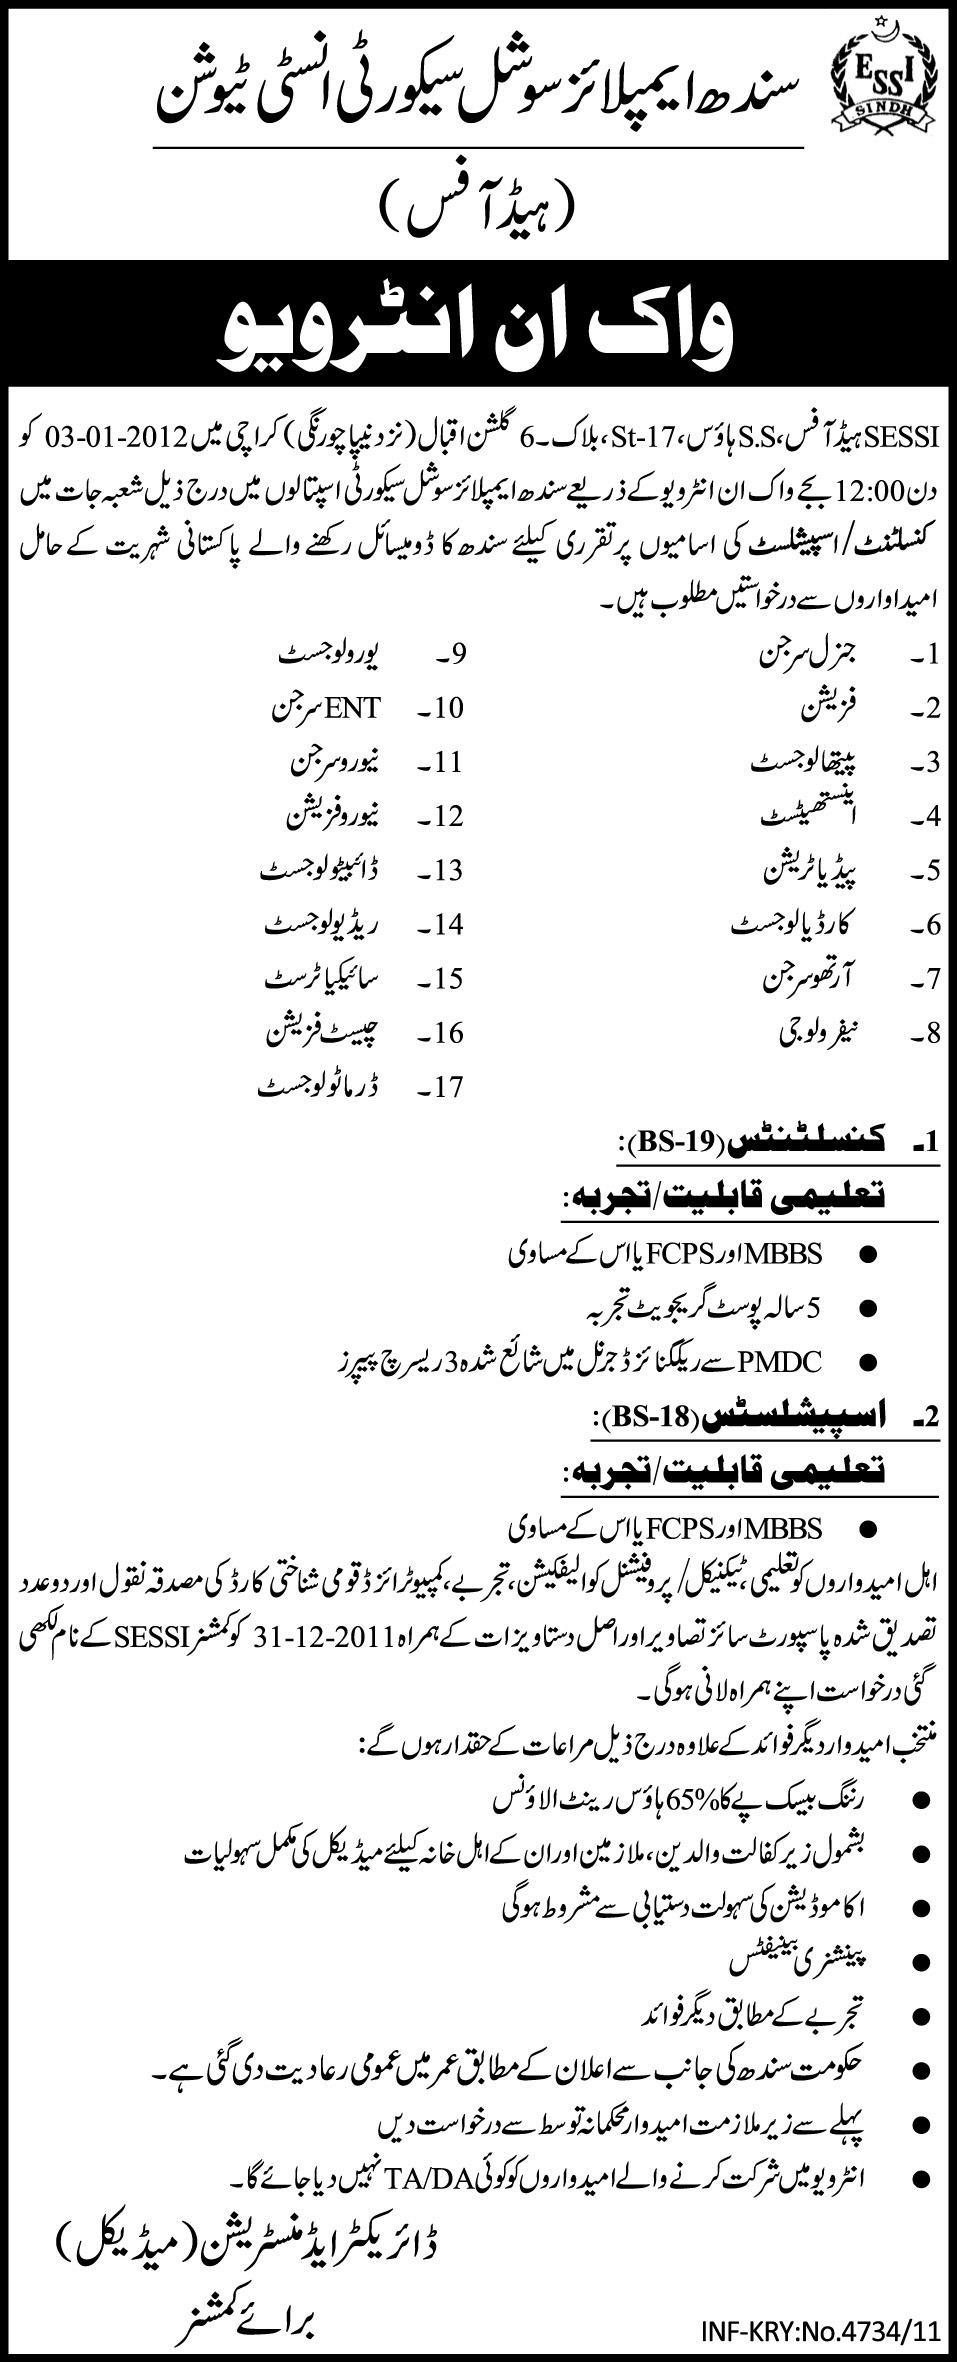 Sindh Employees Social Security Institution Jobs Opportunity